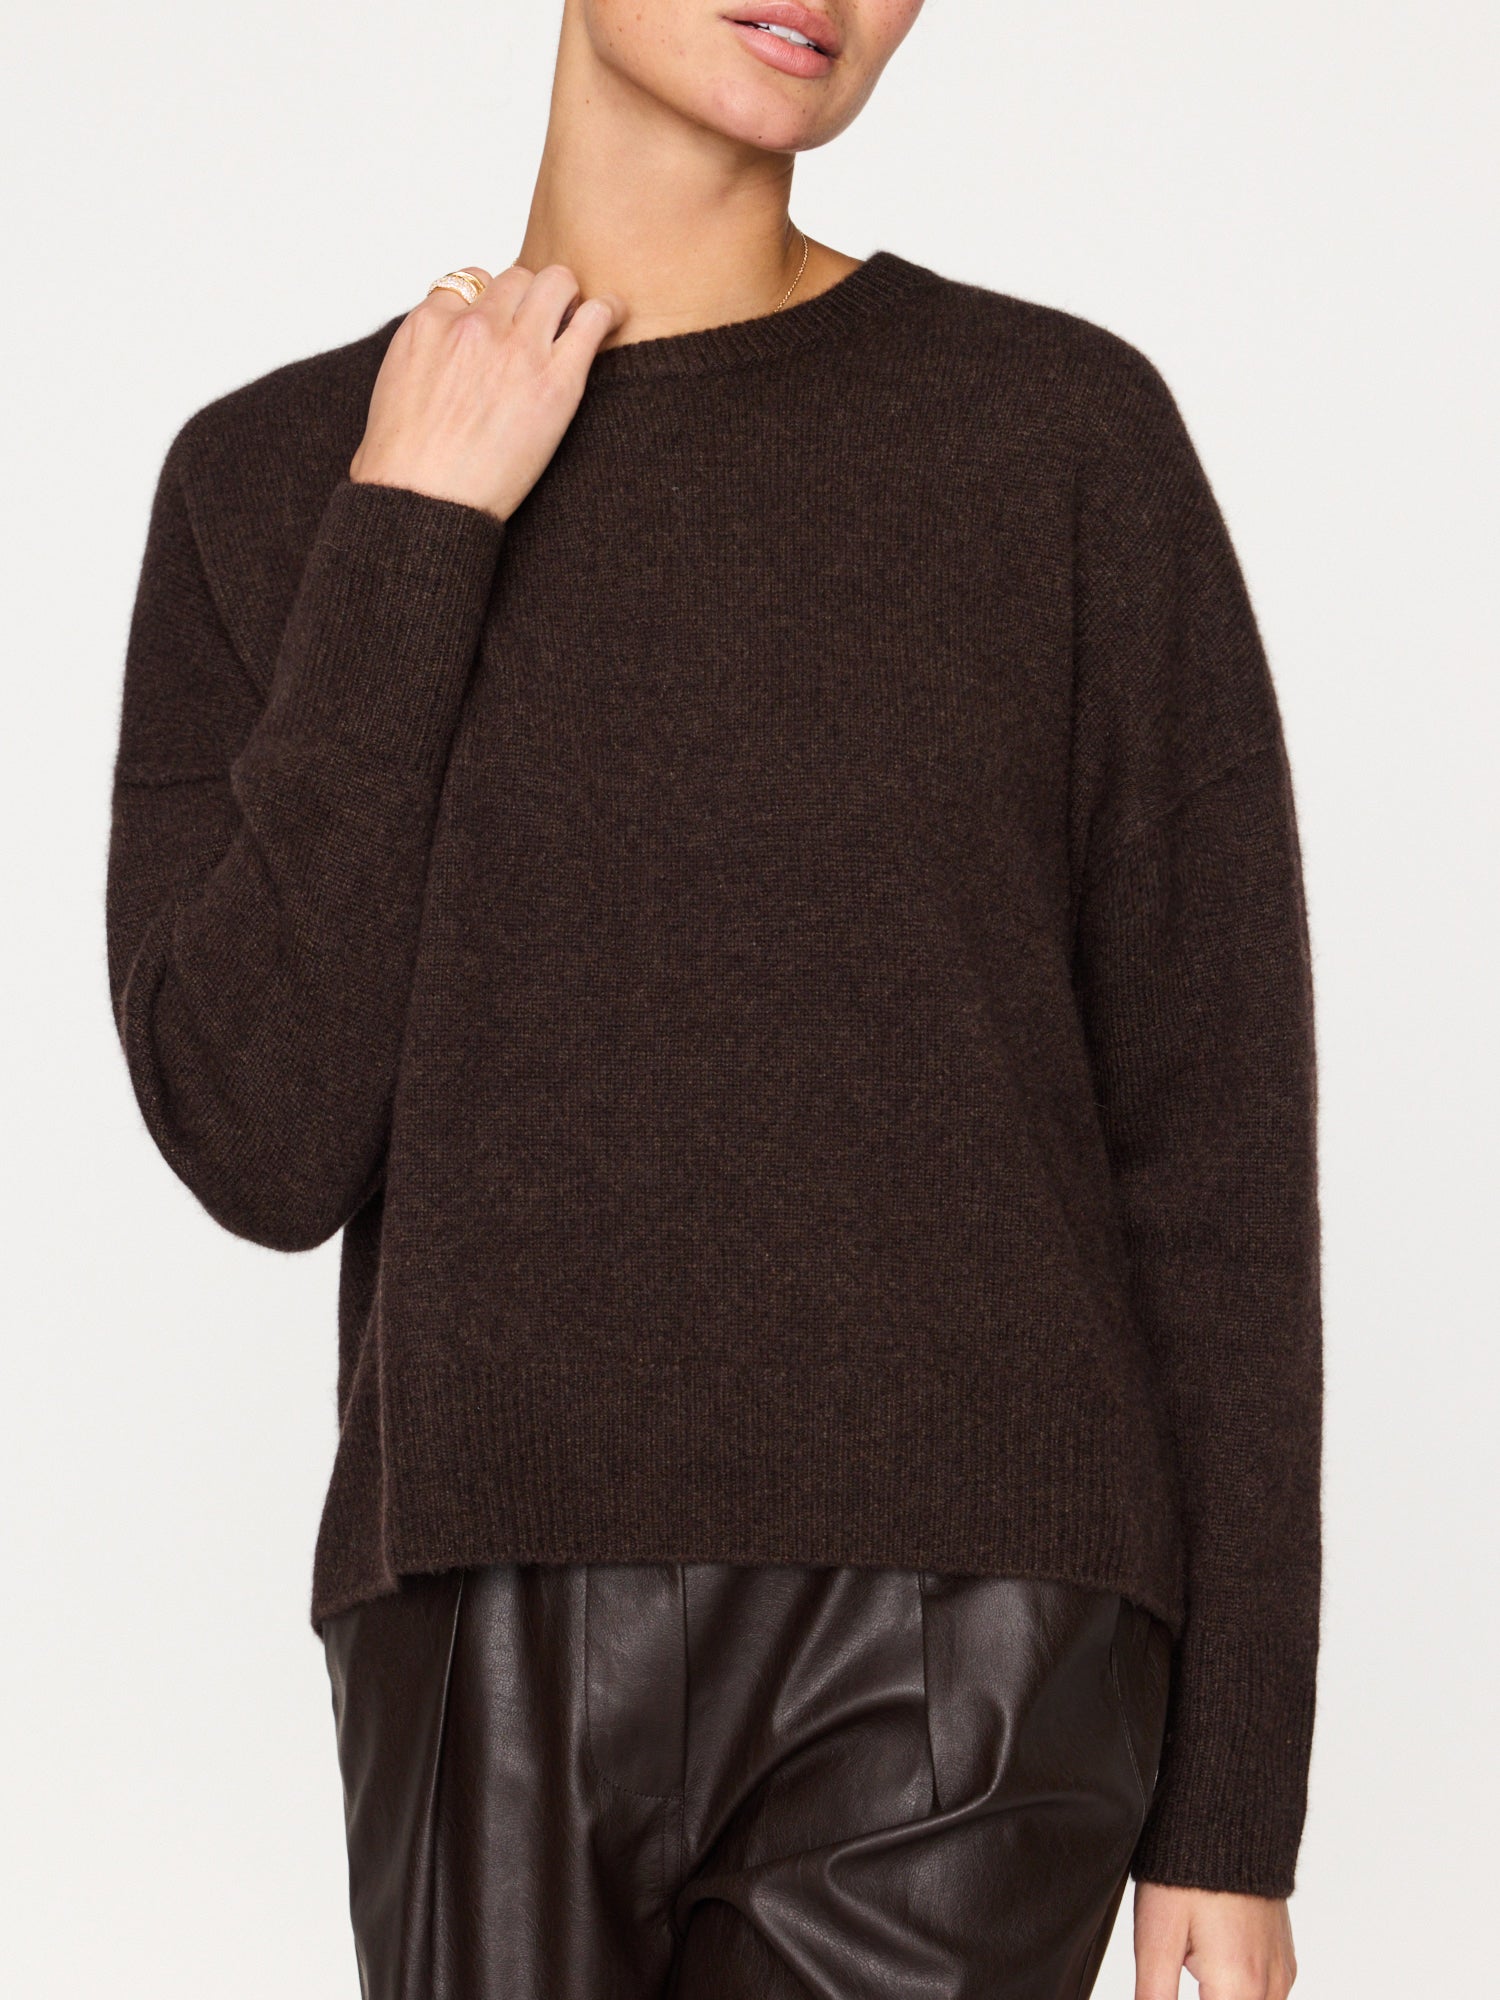 Everyday cashmere crewneck brown sweater front view